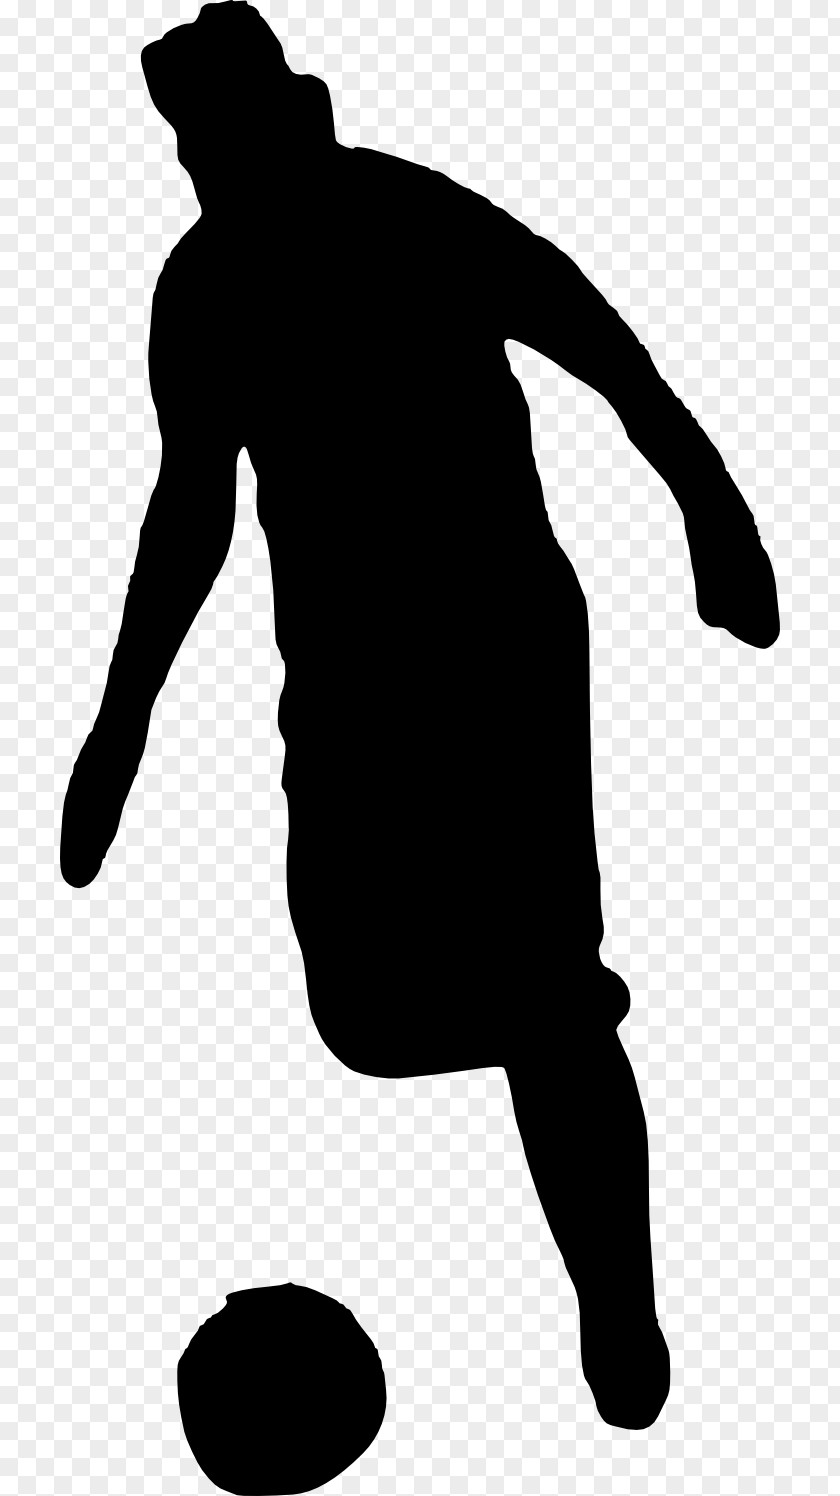 Silhouette Football Player Clip Art PNG